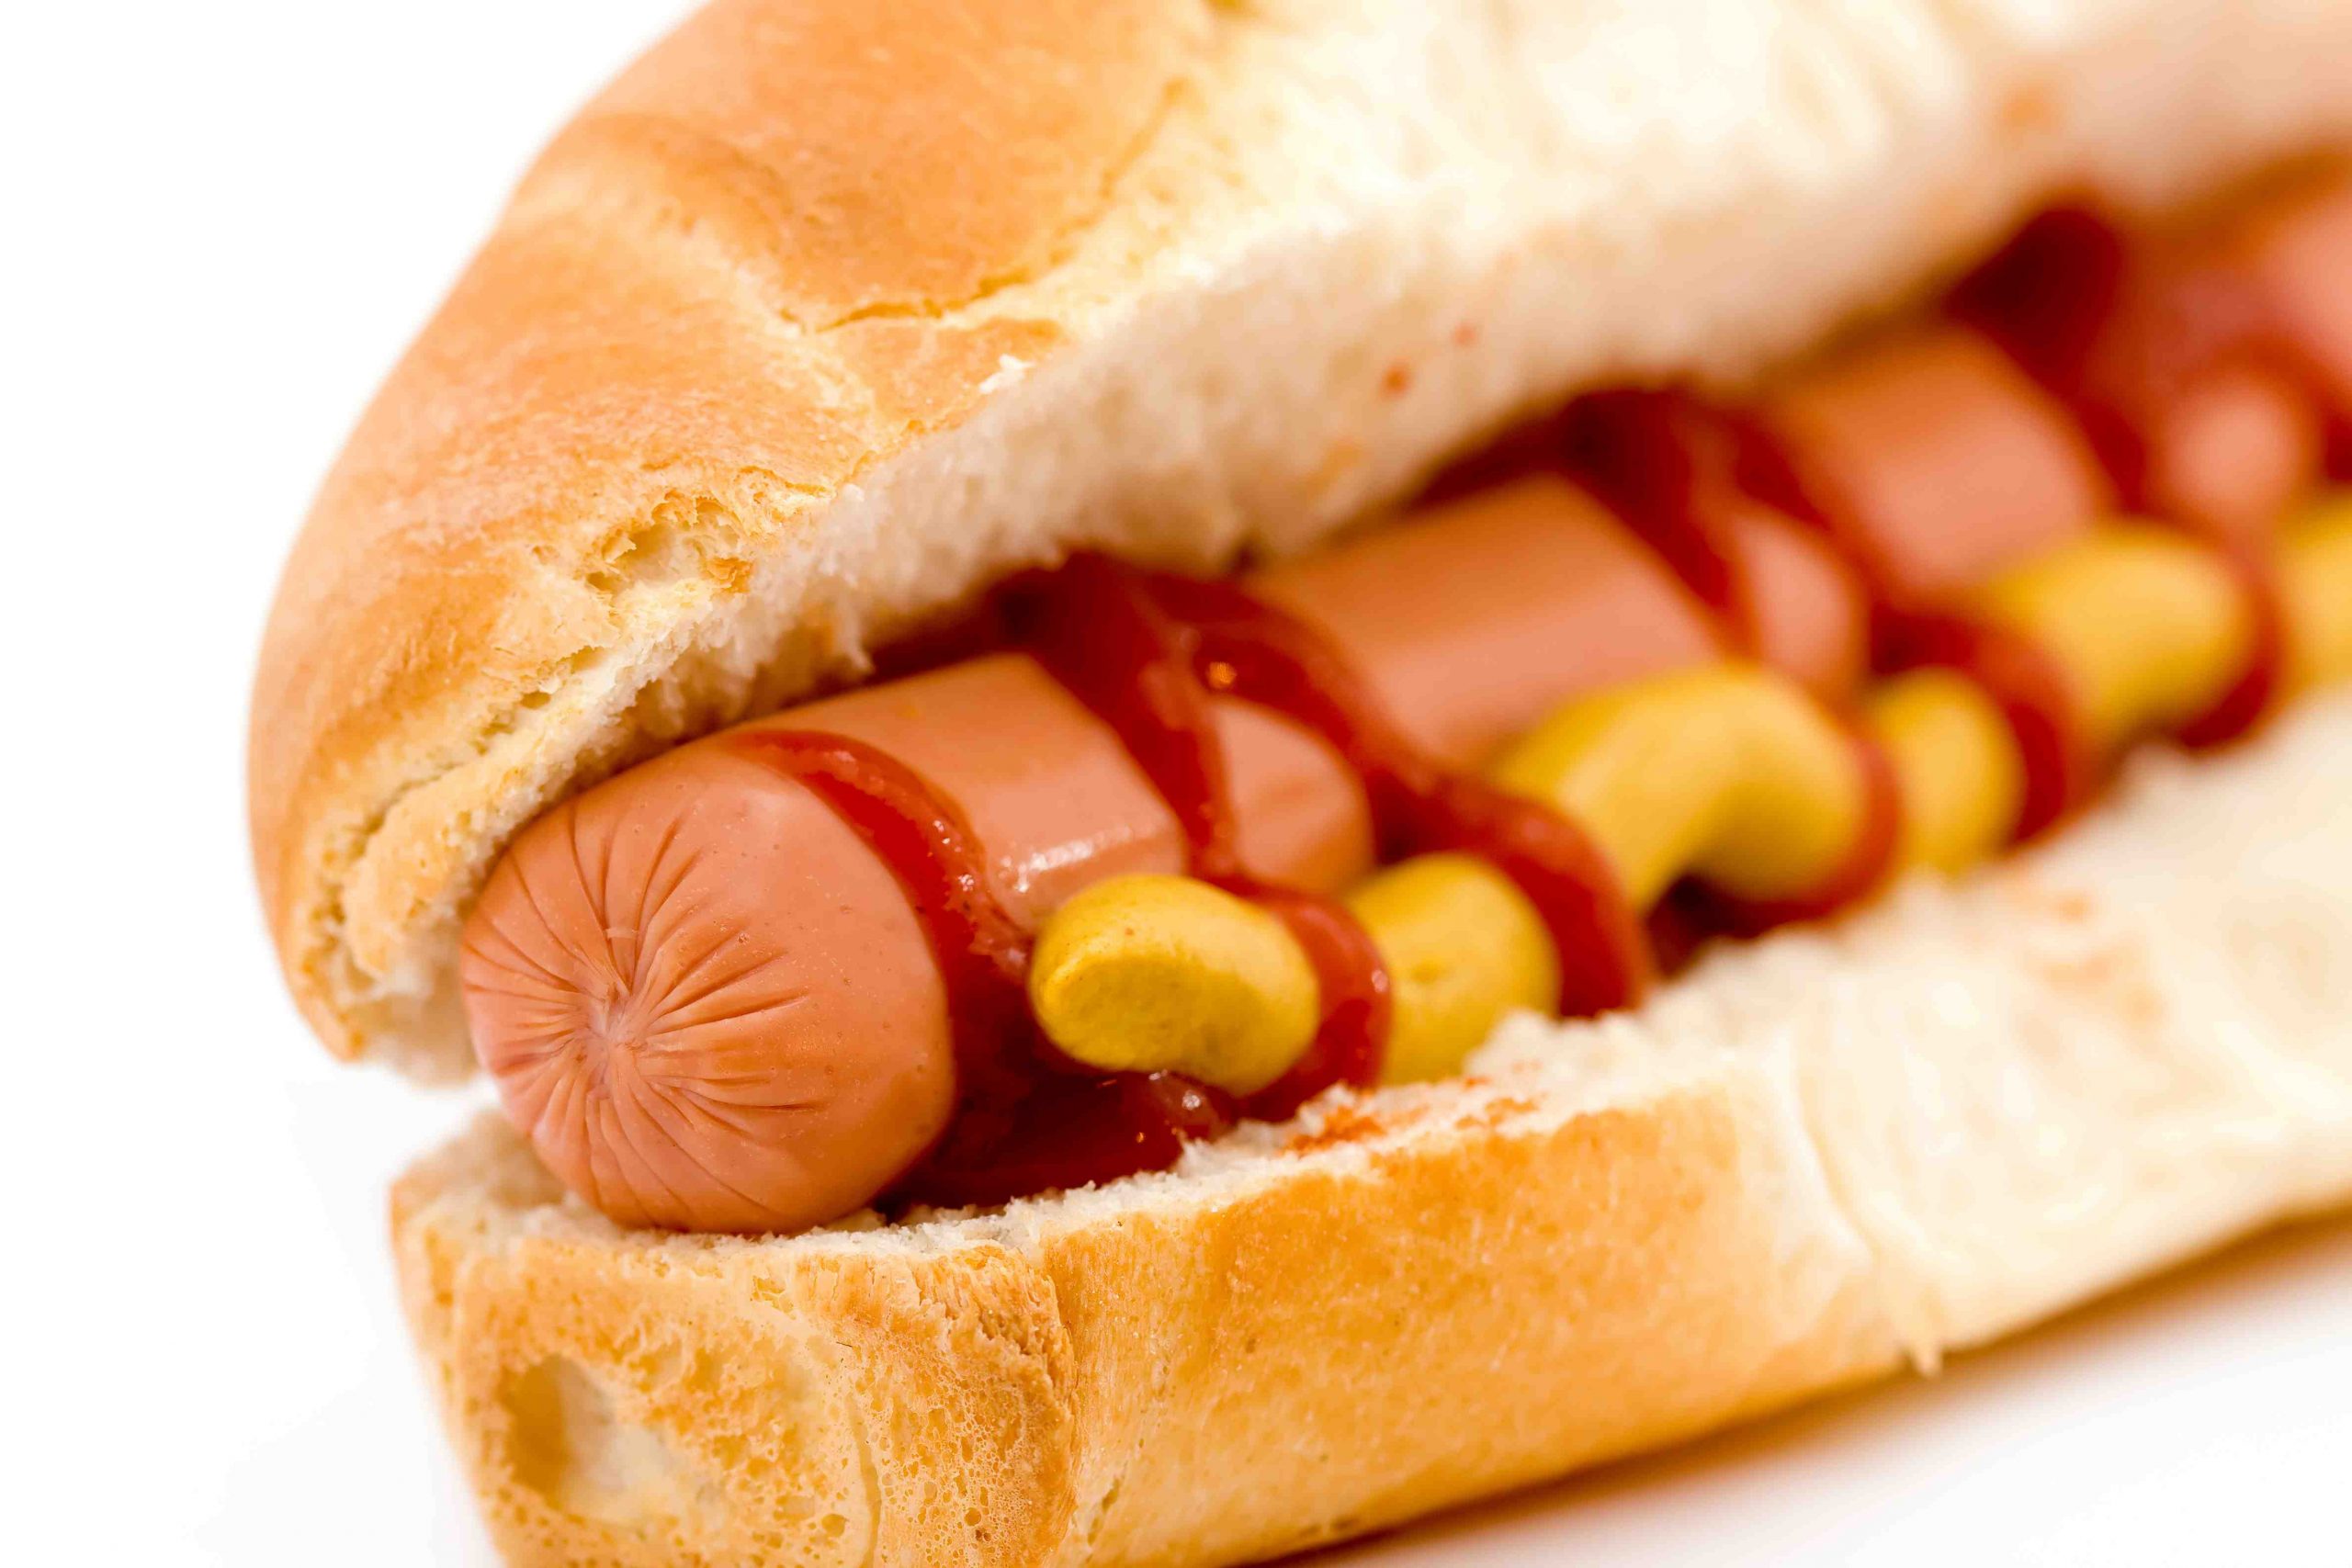 Are pig lips in hot dogs?